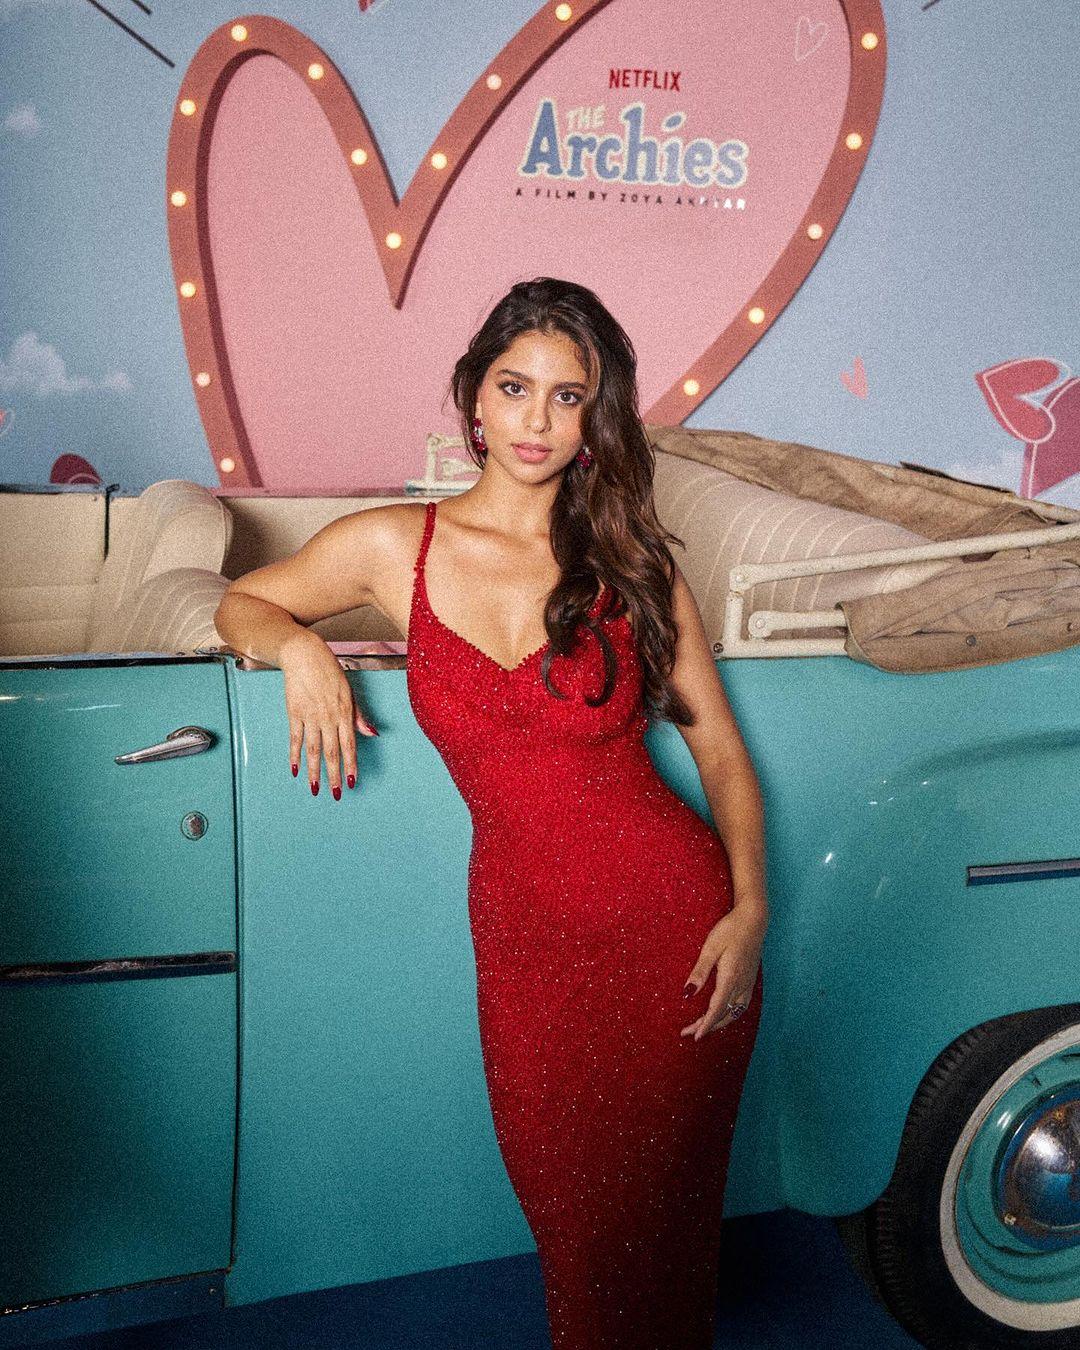 On the premiere night for 'The Archies', Suhana Khan stunned in this red sequin dress. The musical, and Suhana's role has been praised by numerous actors like Katrina Kaif, Janhvi Kapoor and many more celebrities